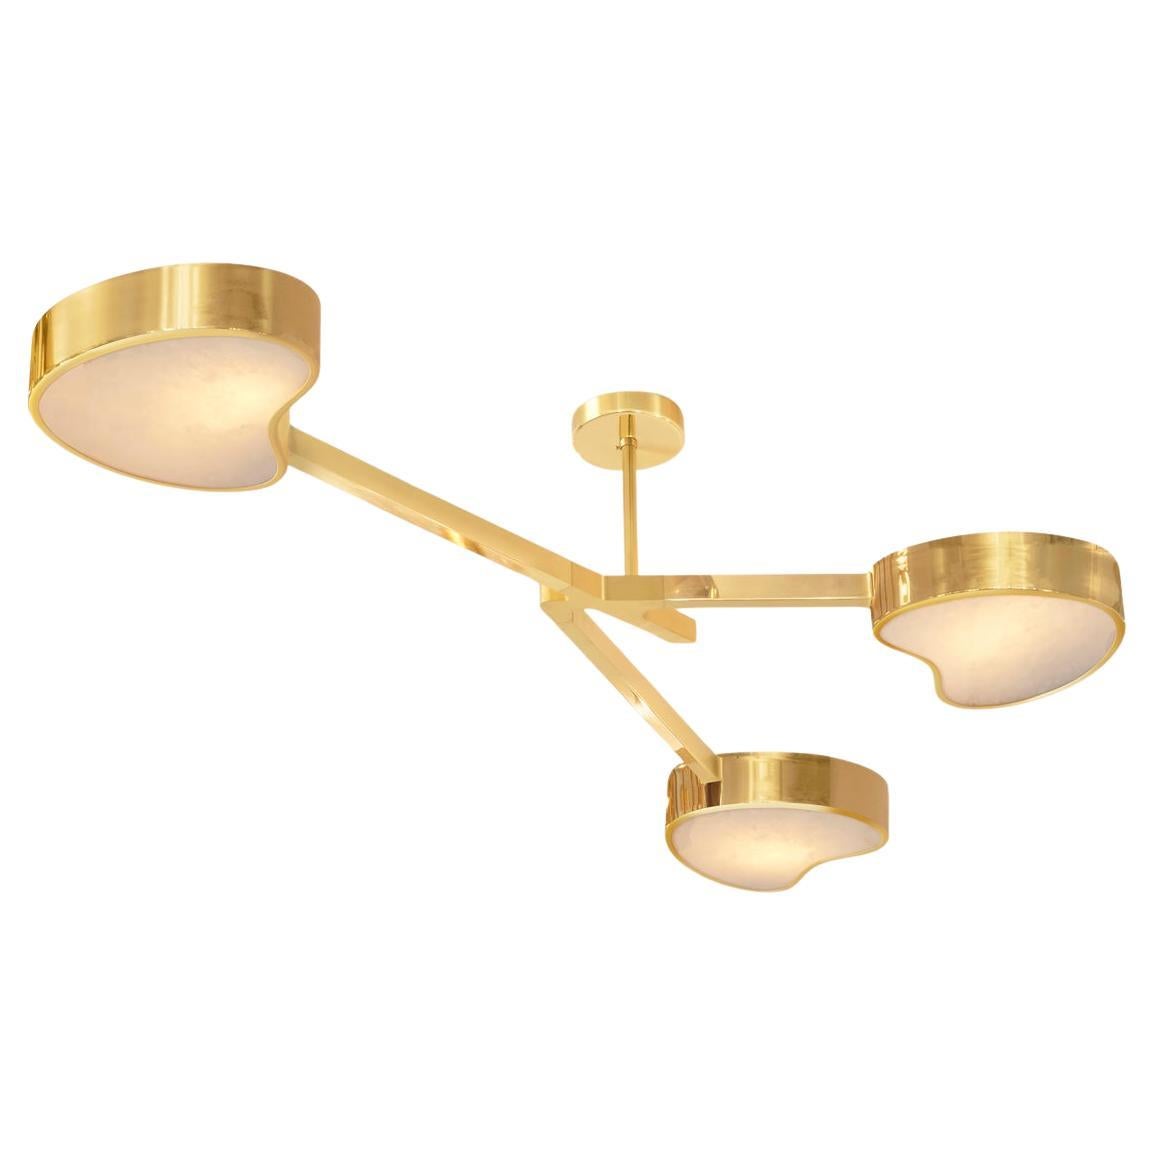 Italian Cuore N.3 Ceiling Light by Gaspare Asaro. Peltro and Bronze Finish For Sale